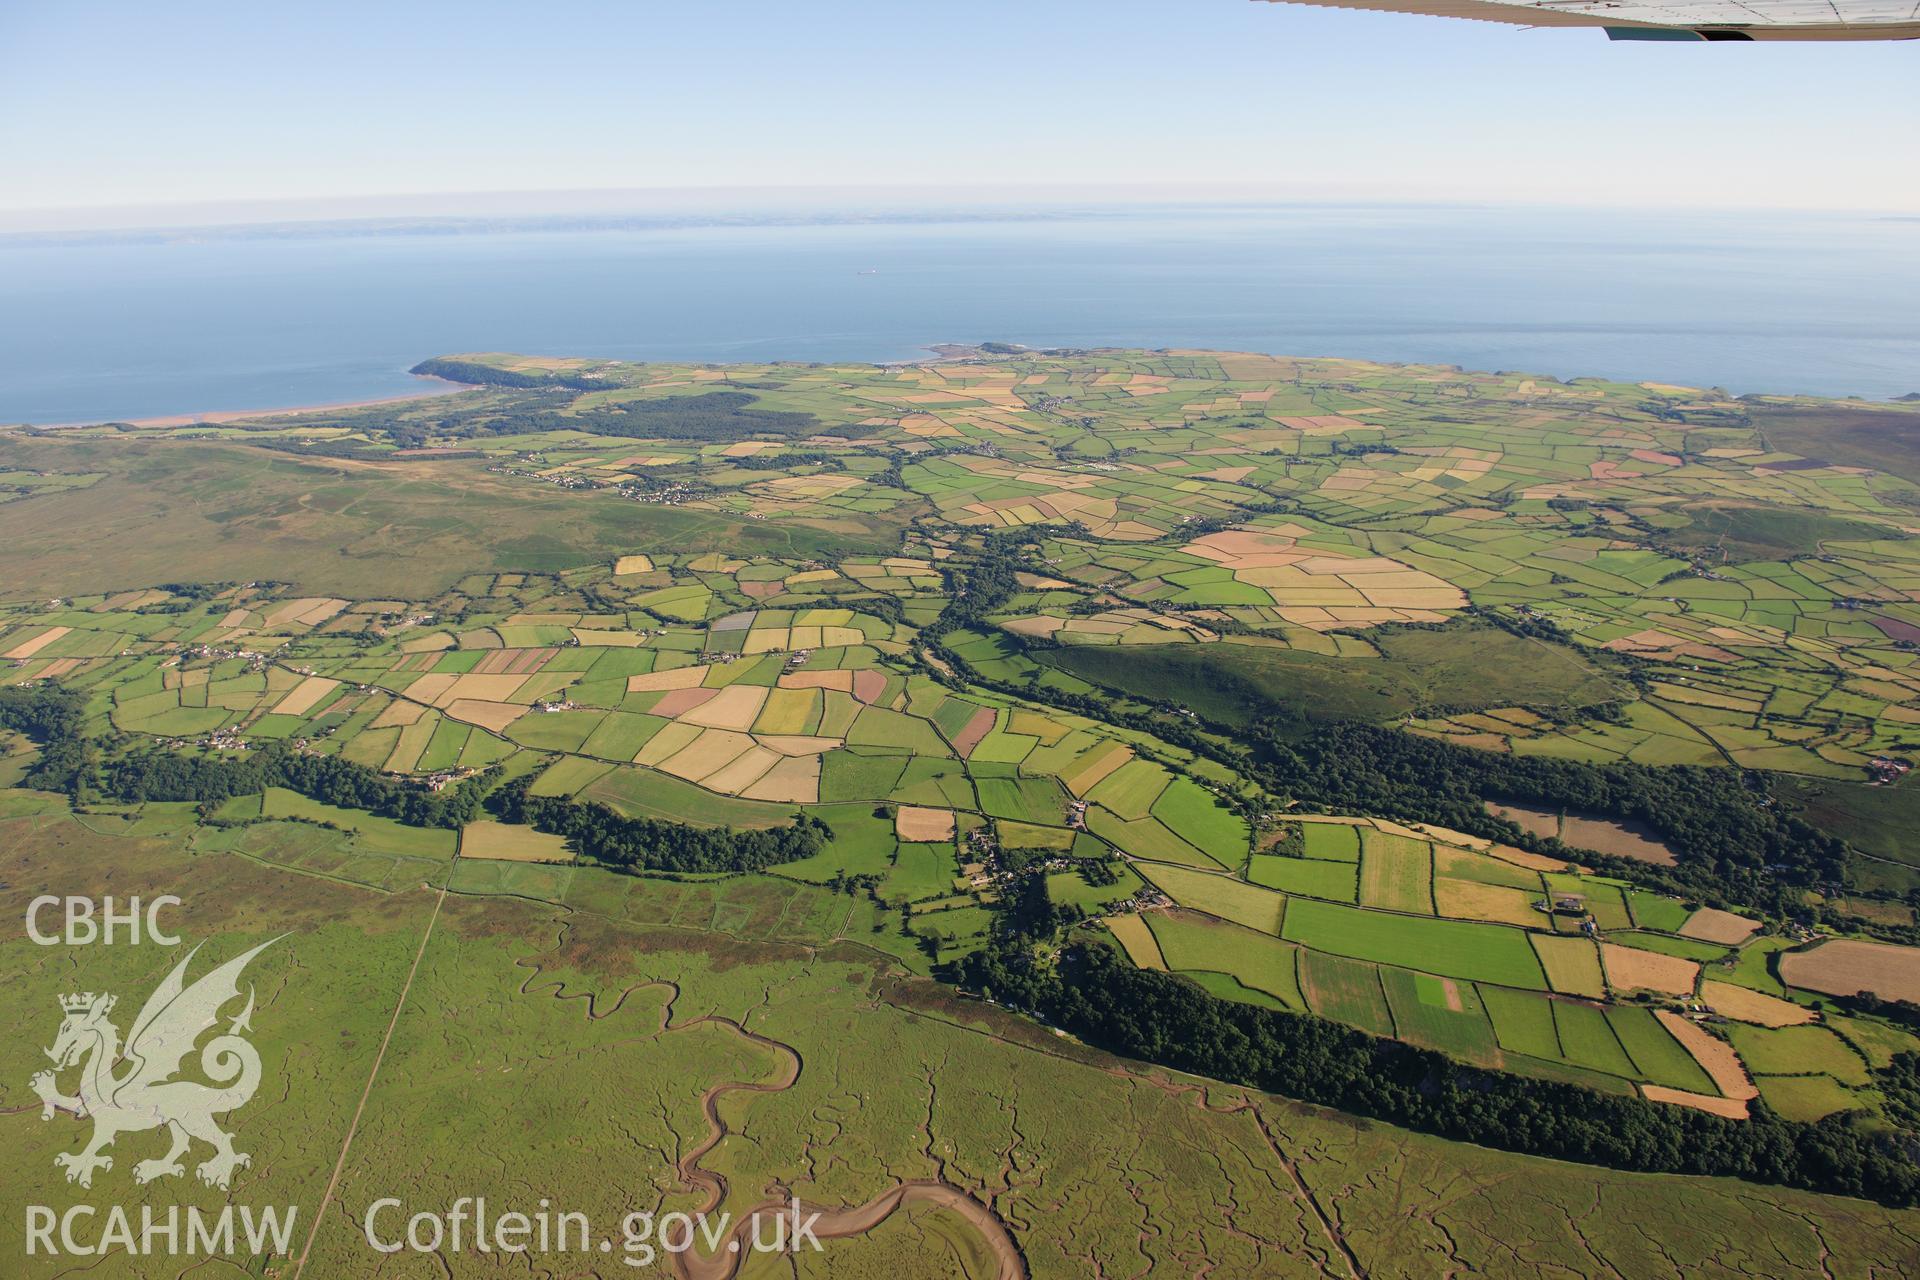 RCAHMW colour oblique photograph of West Gower, high landscape view over Landimore. Taken by Toby Driver on 24/07/2012.